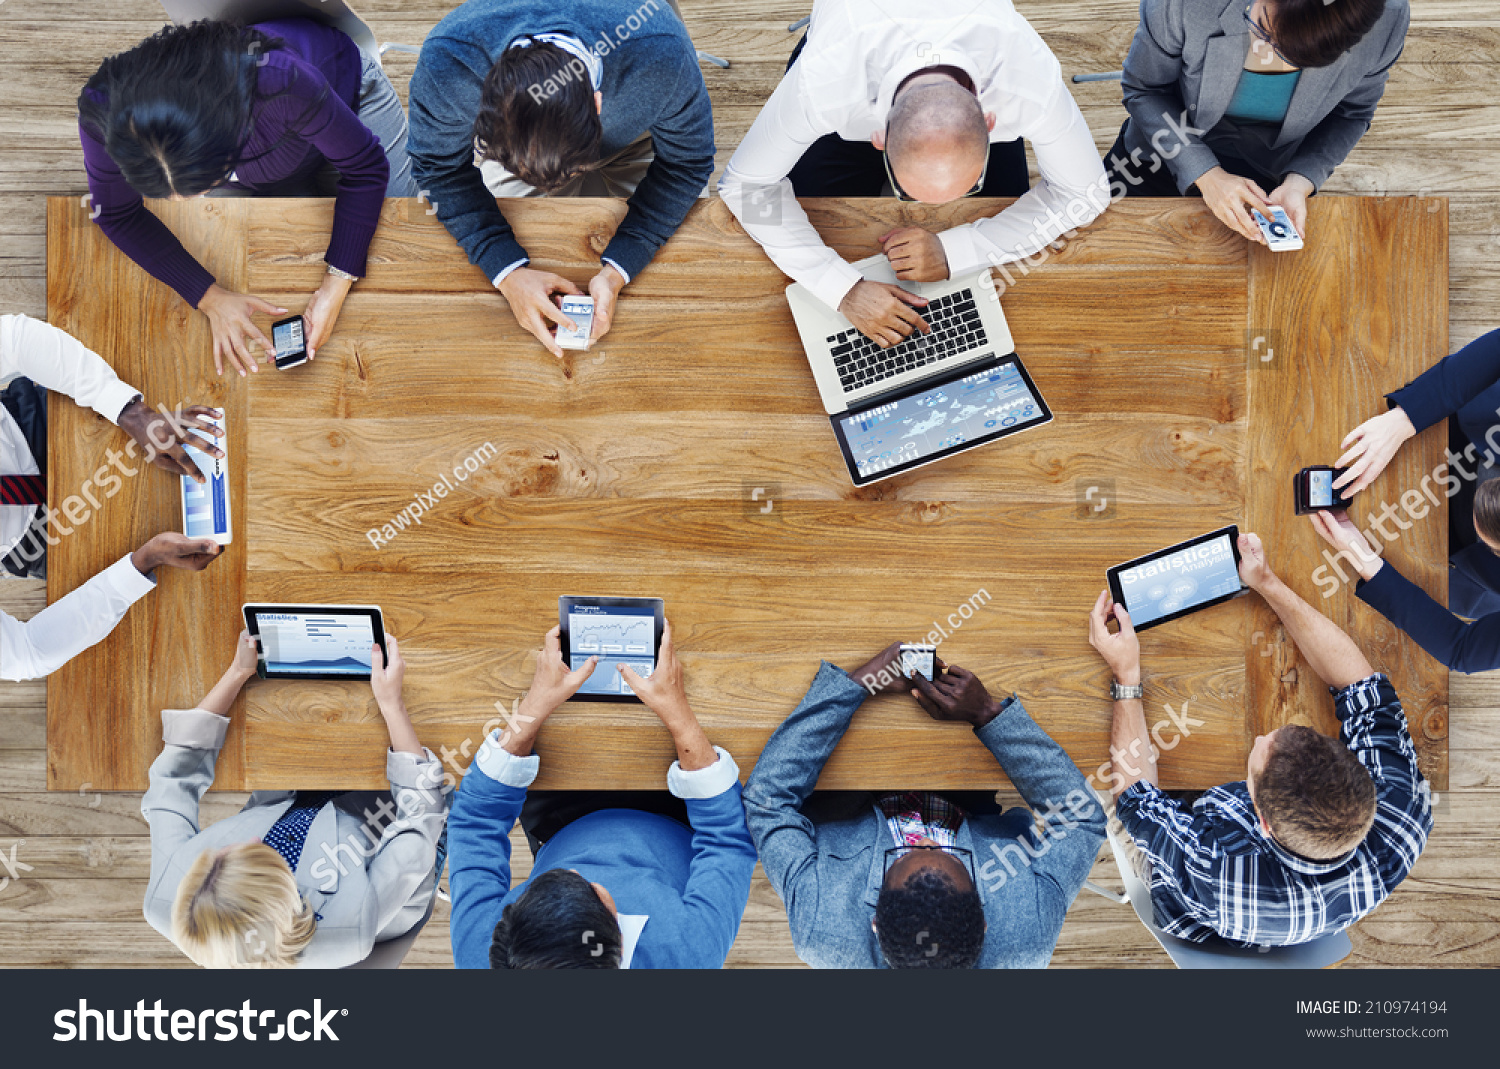 Group of Business People Using Digital Devices #210974194